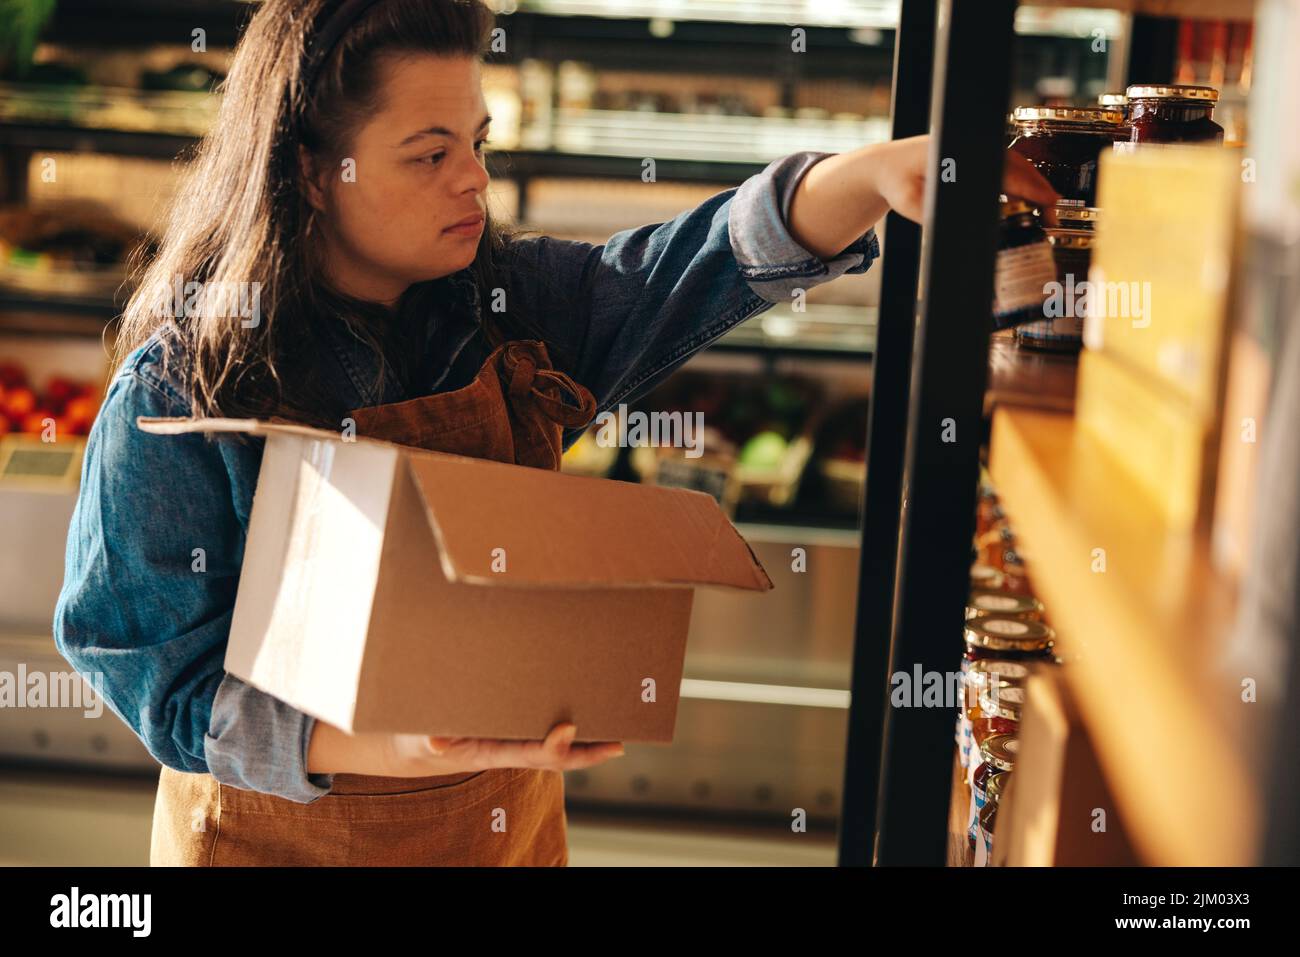 Supermarket employee with Down syndrome restocking food products onto the shop shelves. Empowered woman with an intellectual disability working as a s Stock Photo